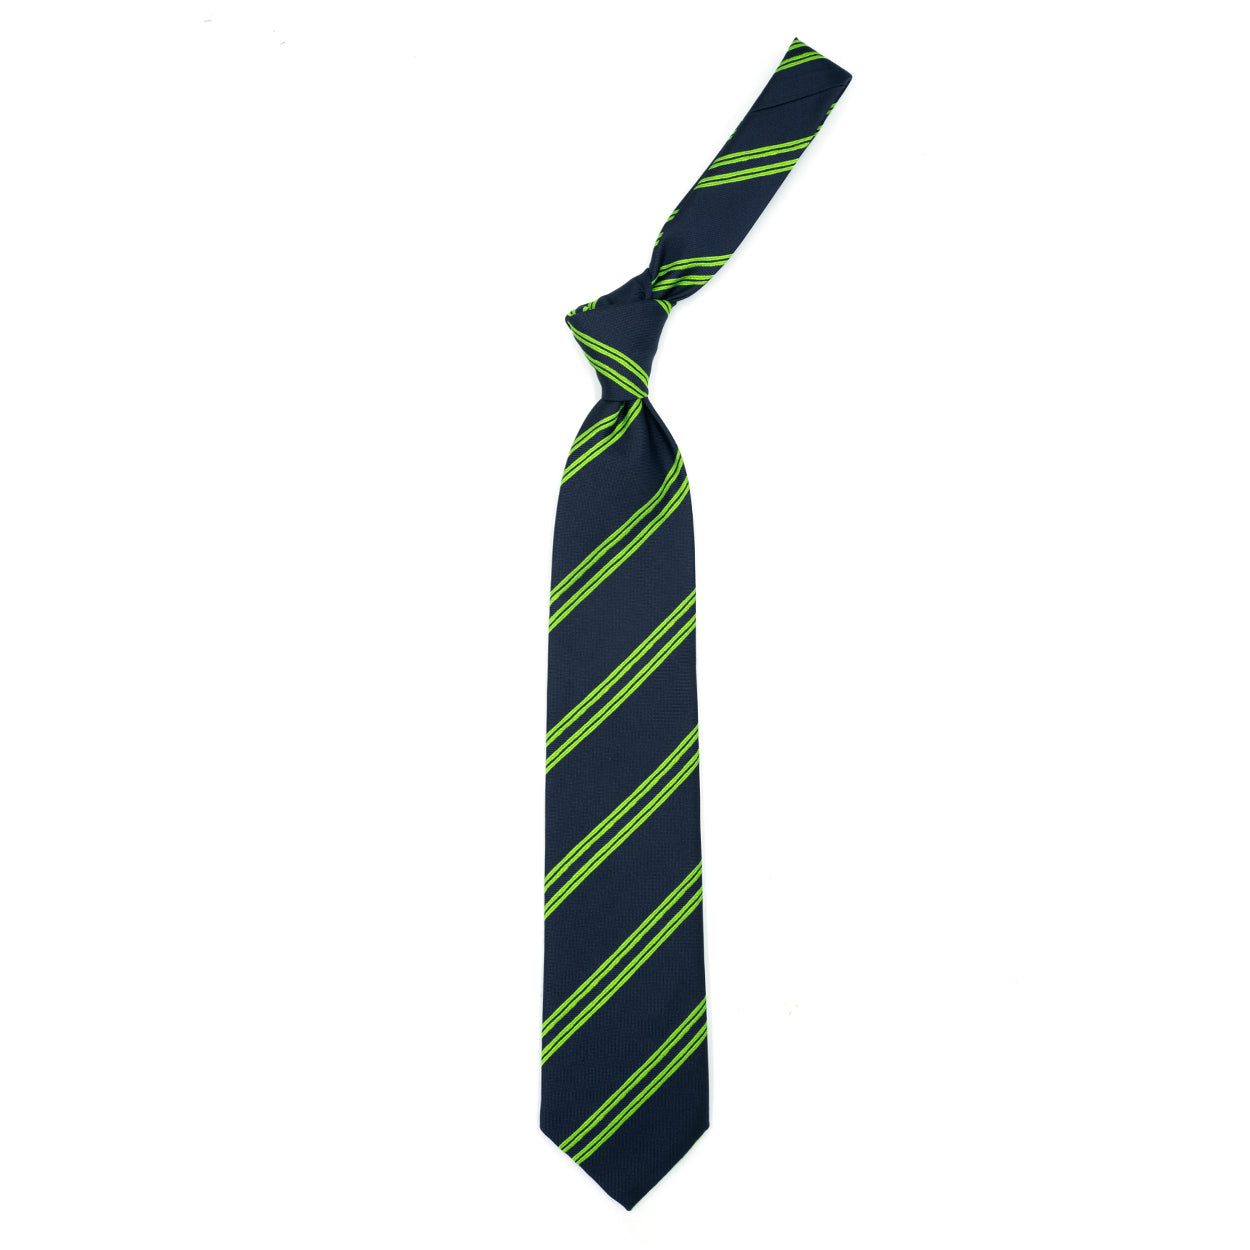 Blue tie with green stripes